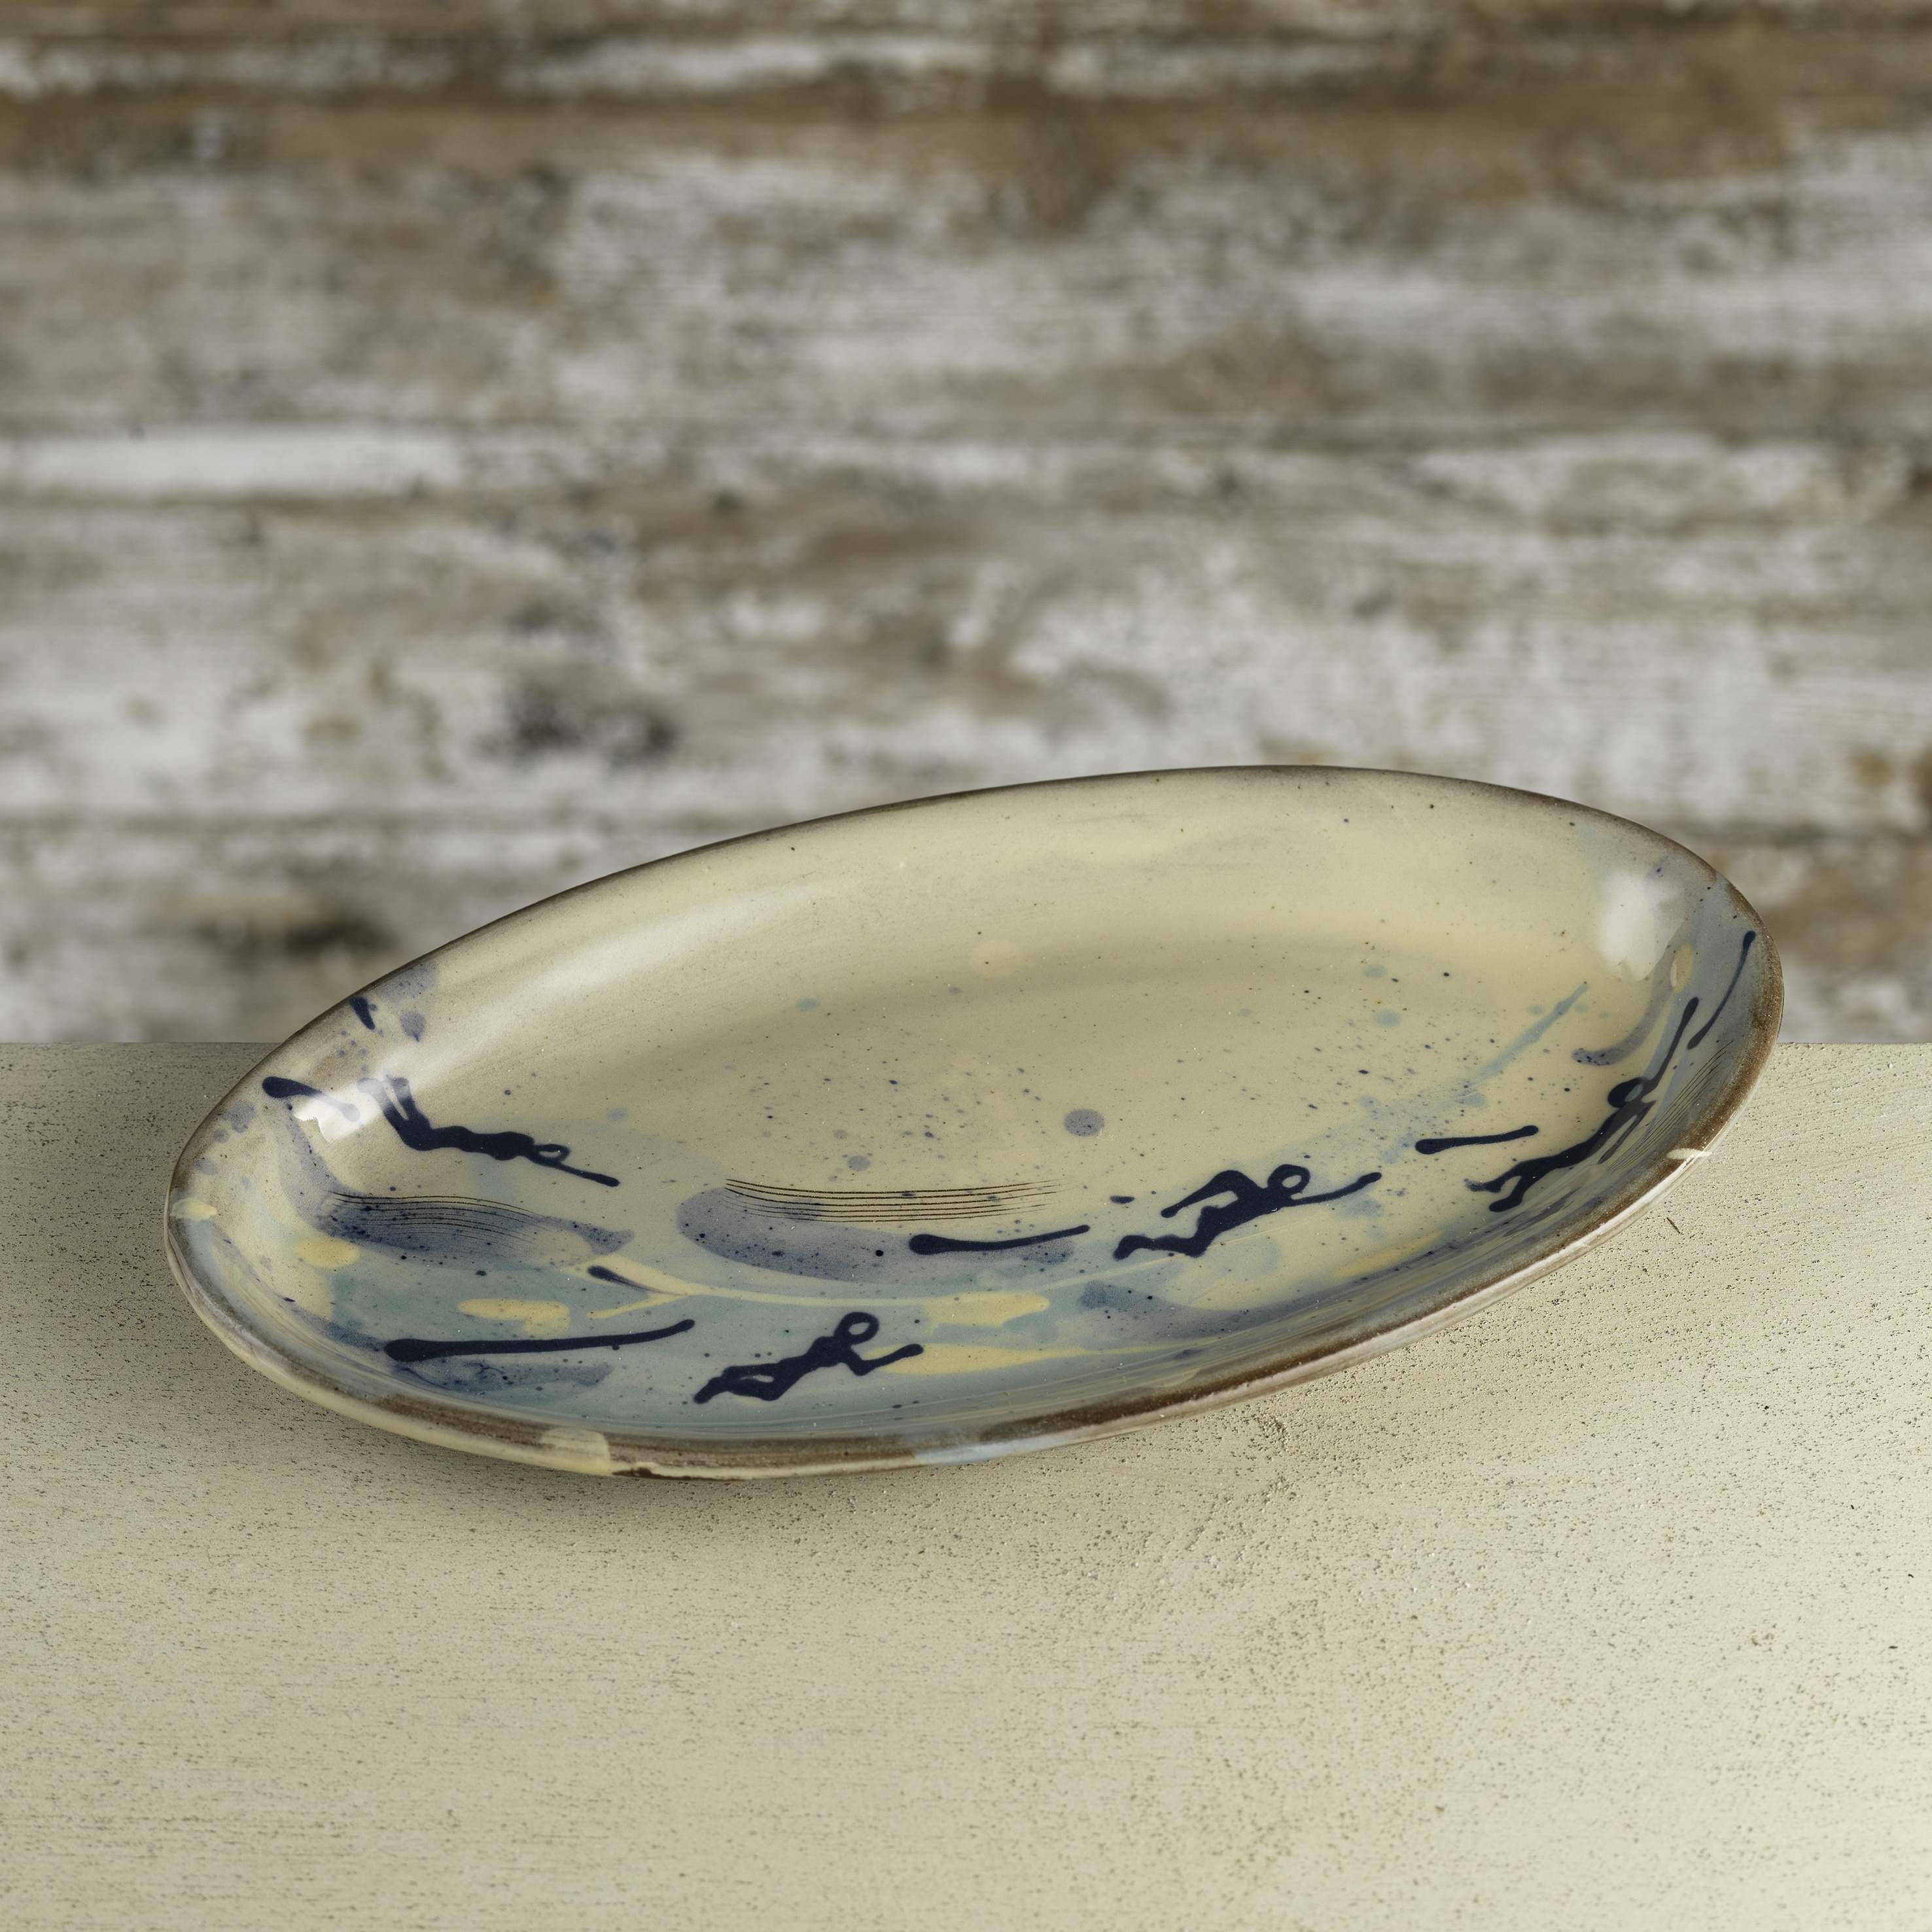 Small oval swimmers platter